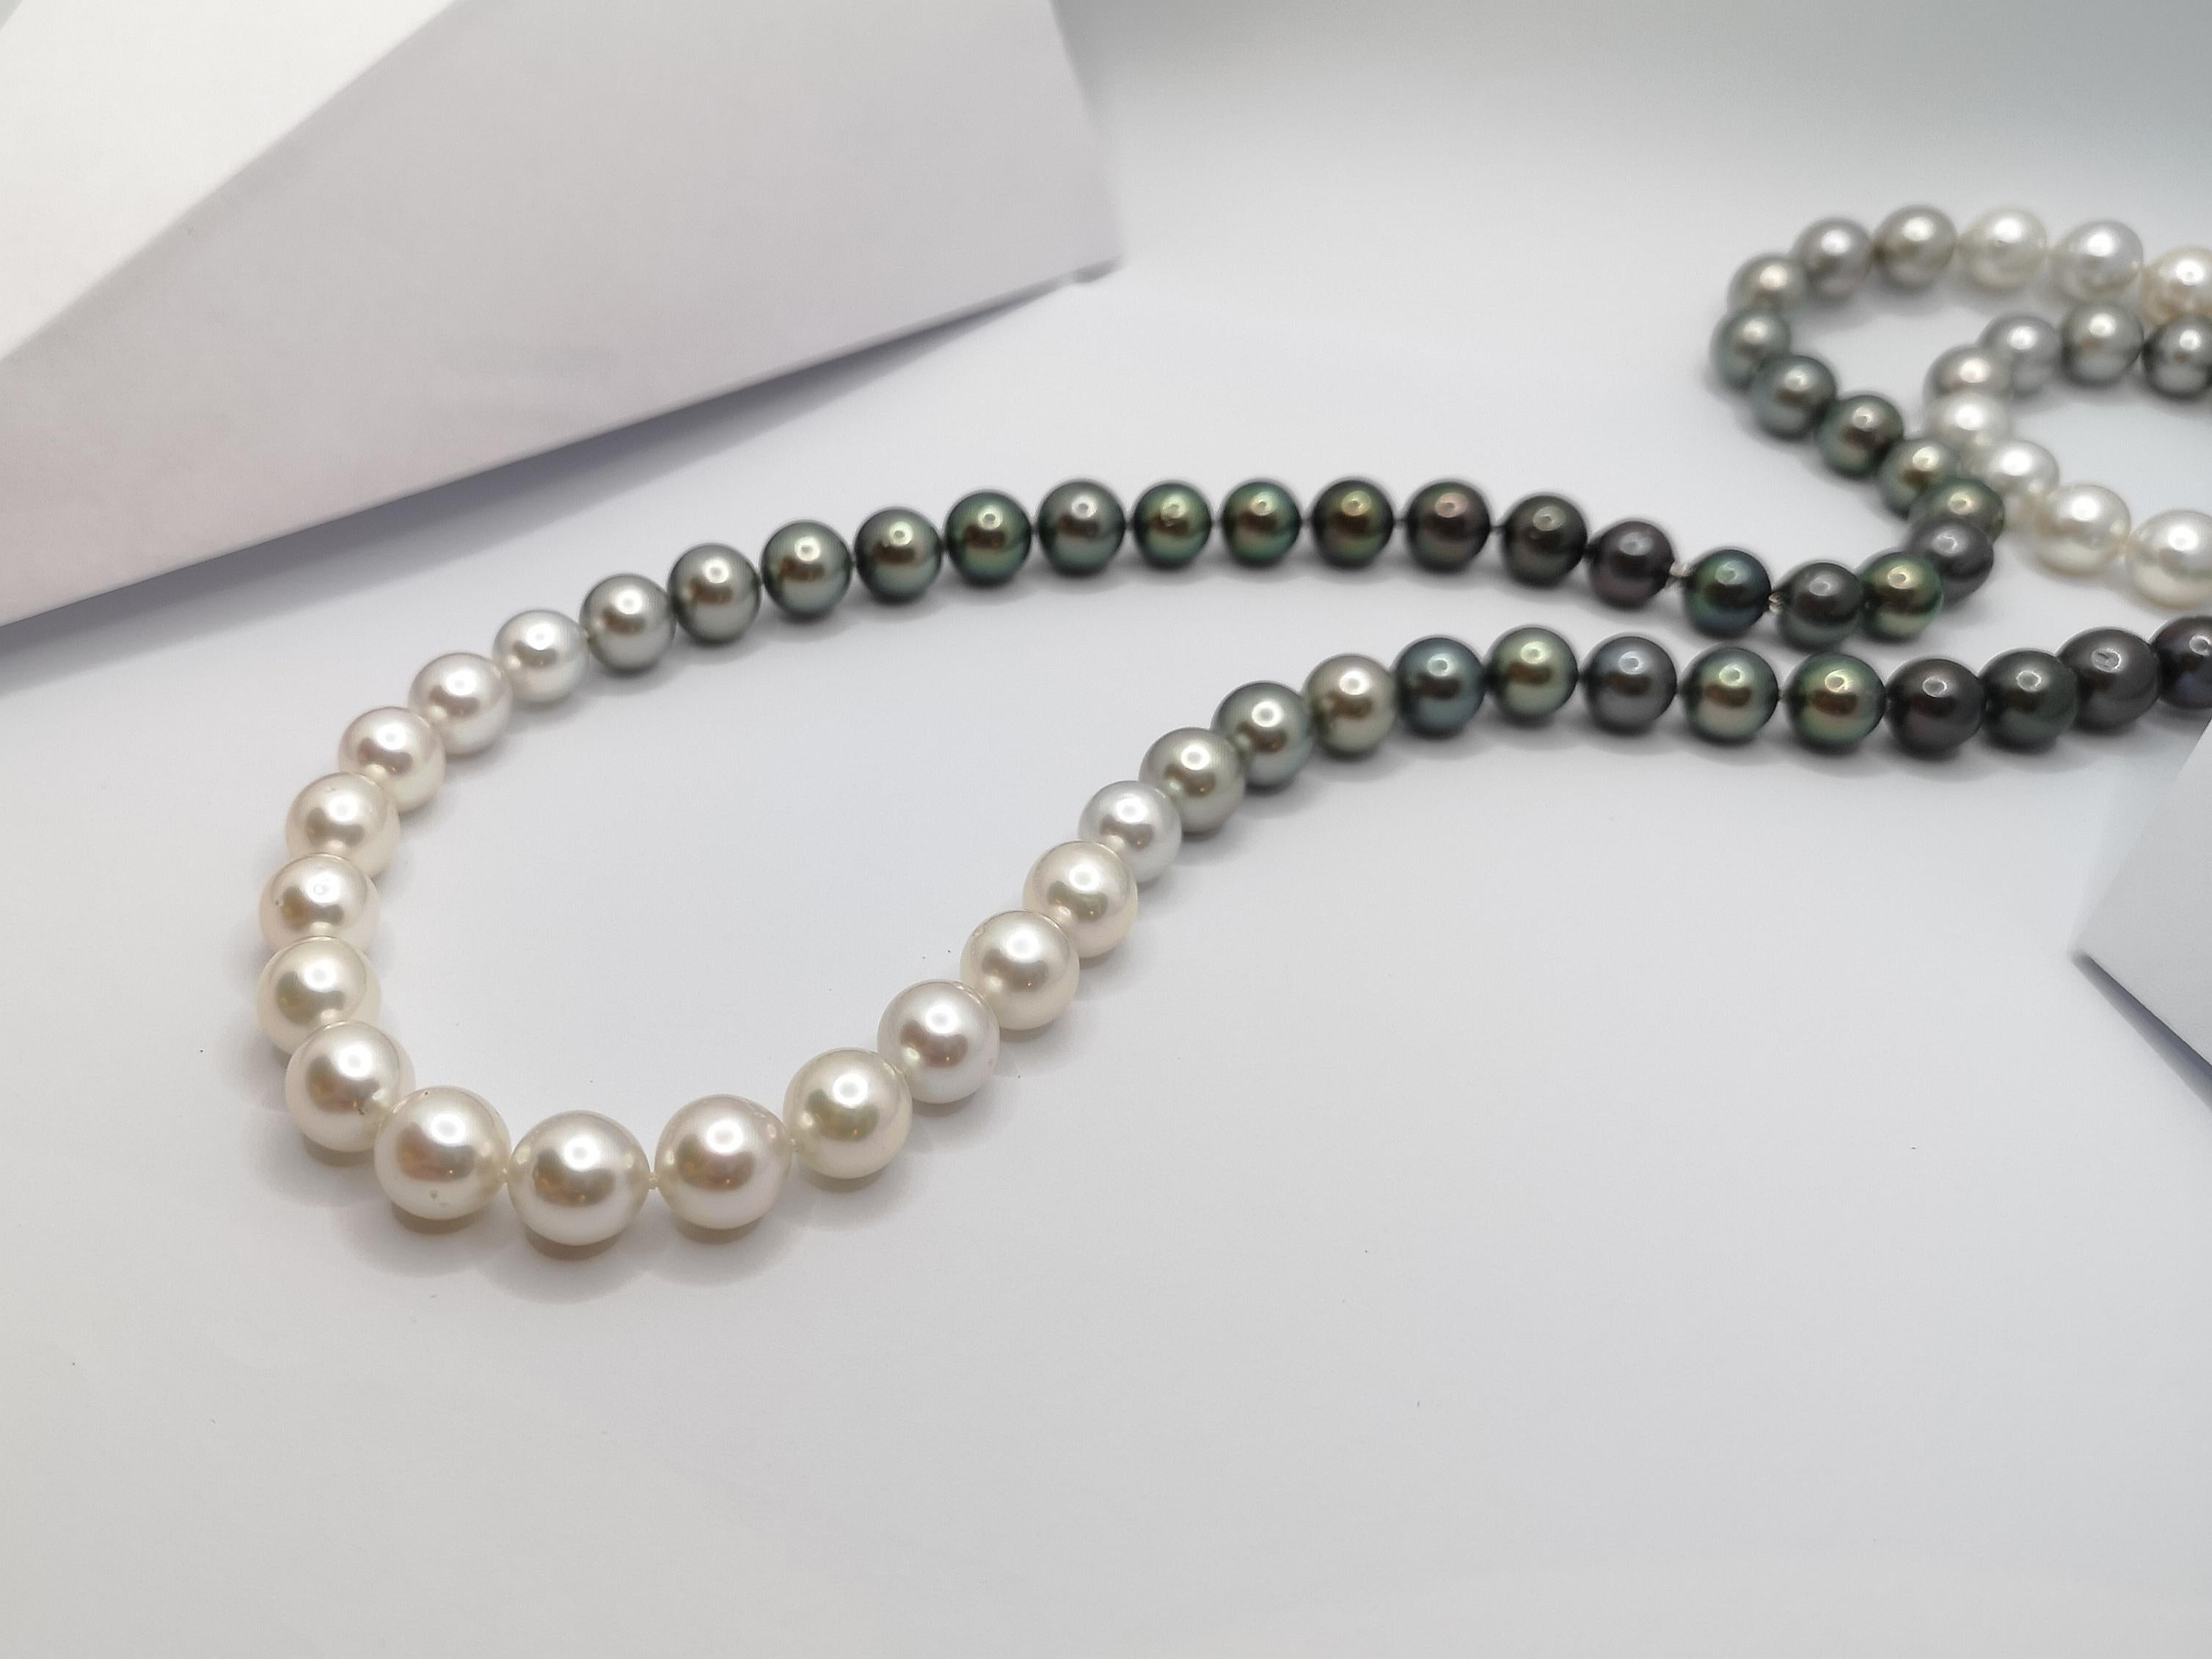 Gradutated Color South Sea Pearl Necklace with Hidden 18K White Gold Clasp For Sale 2